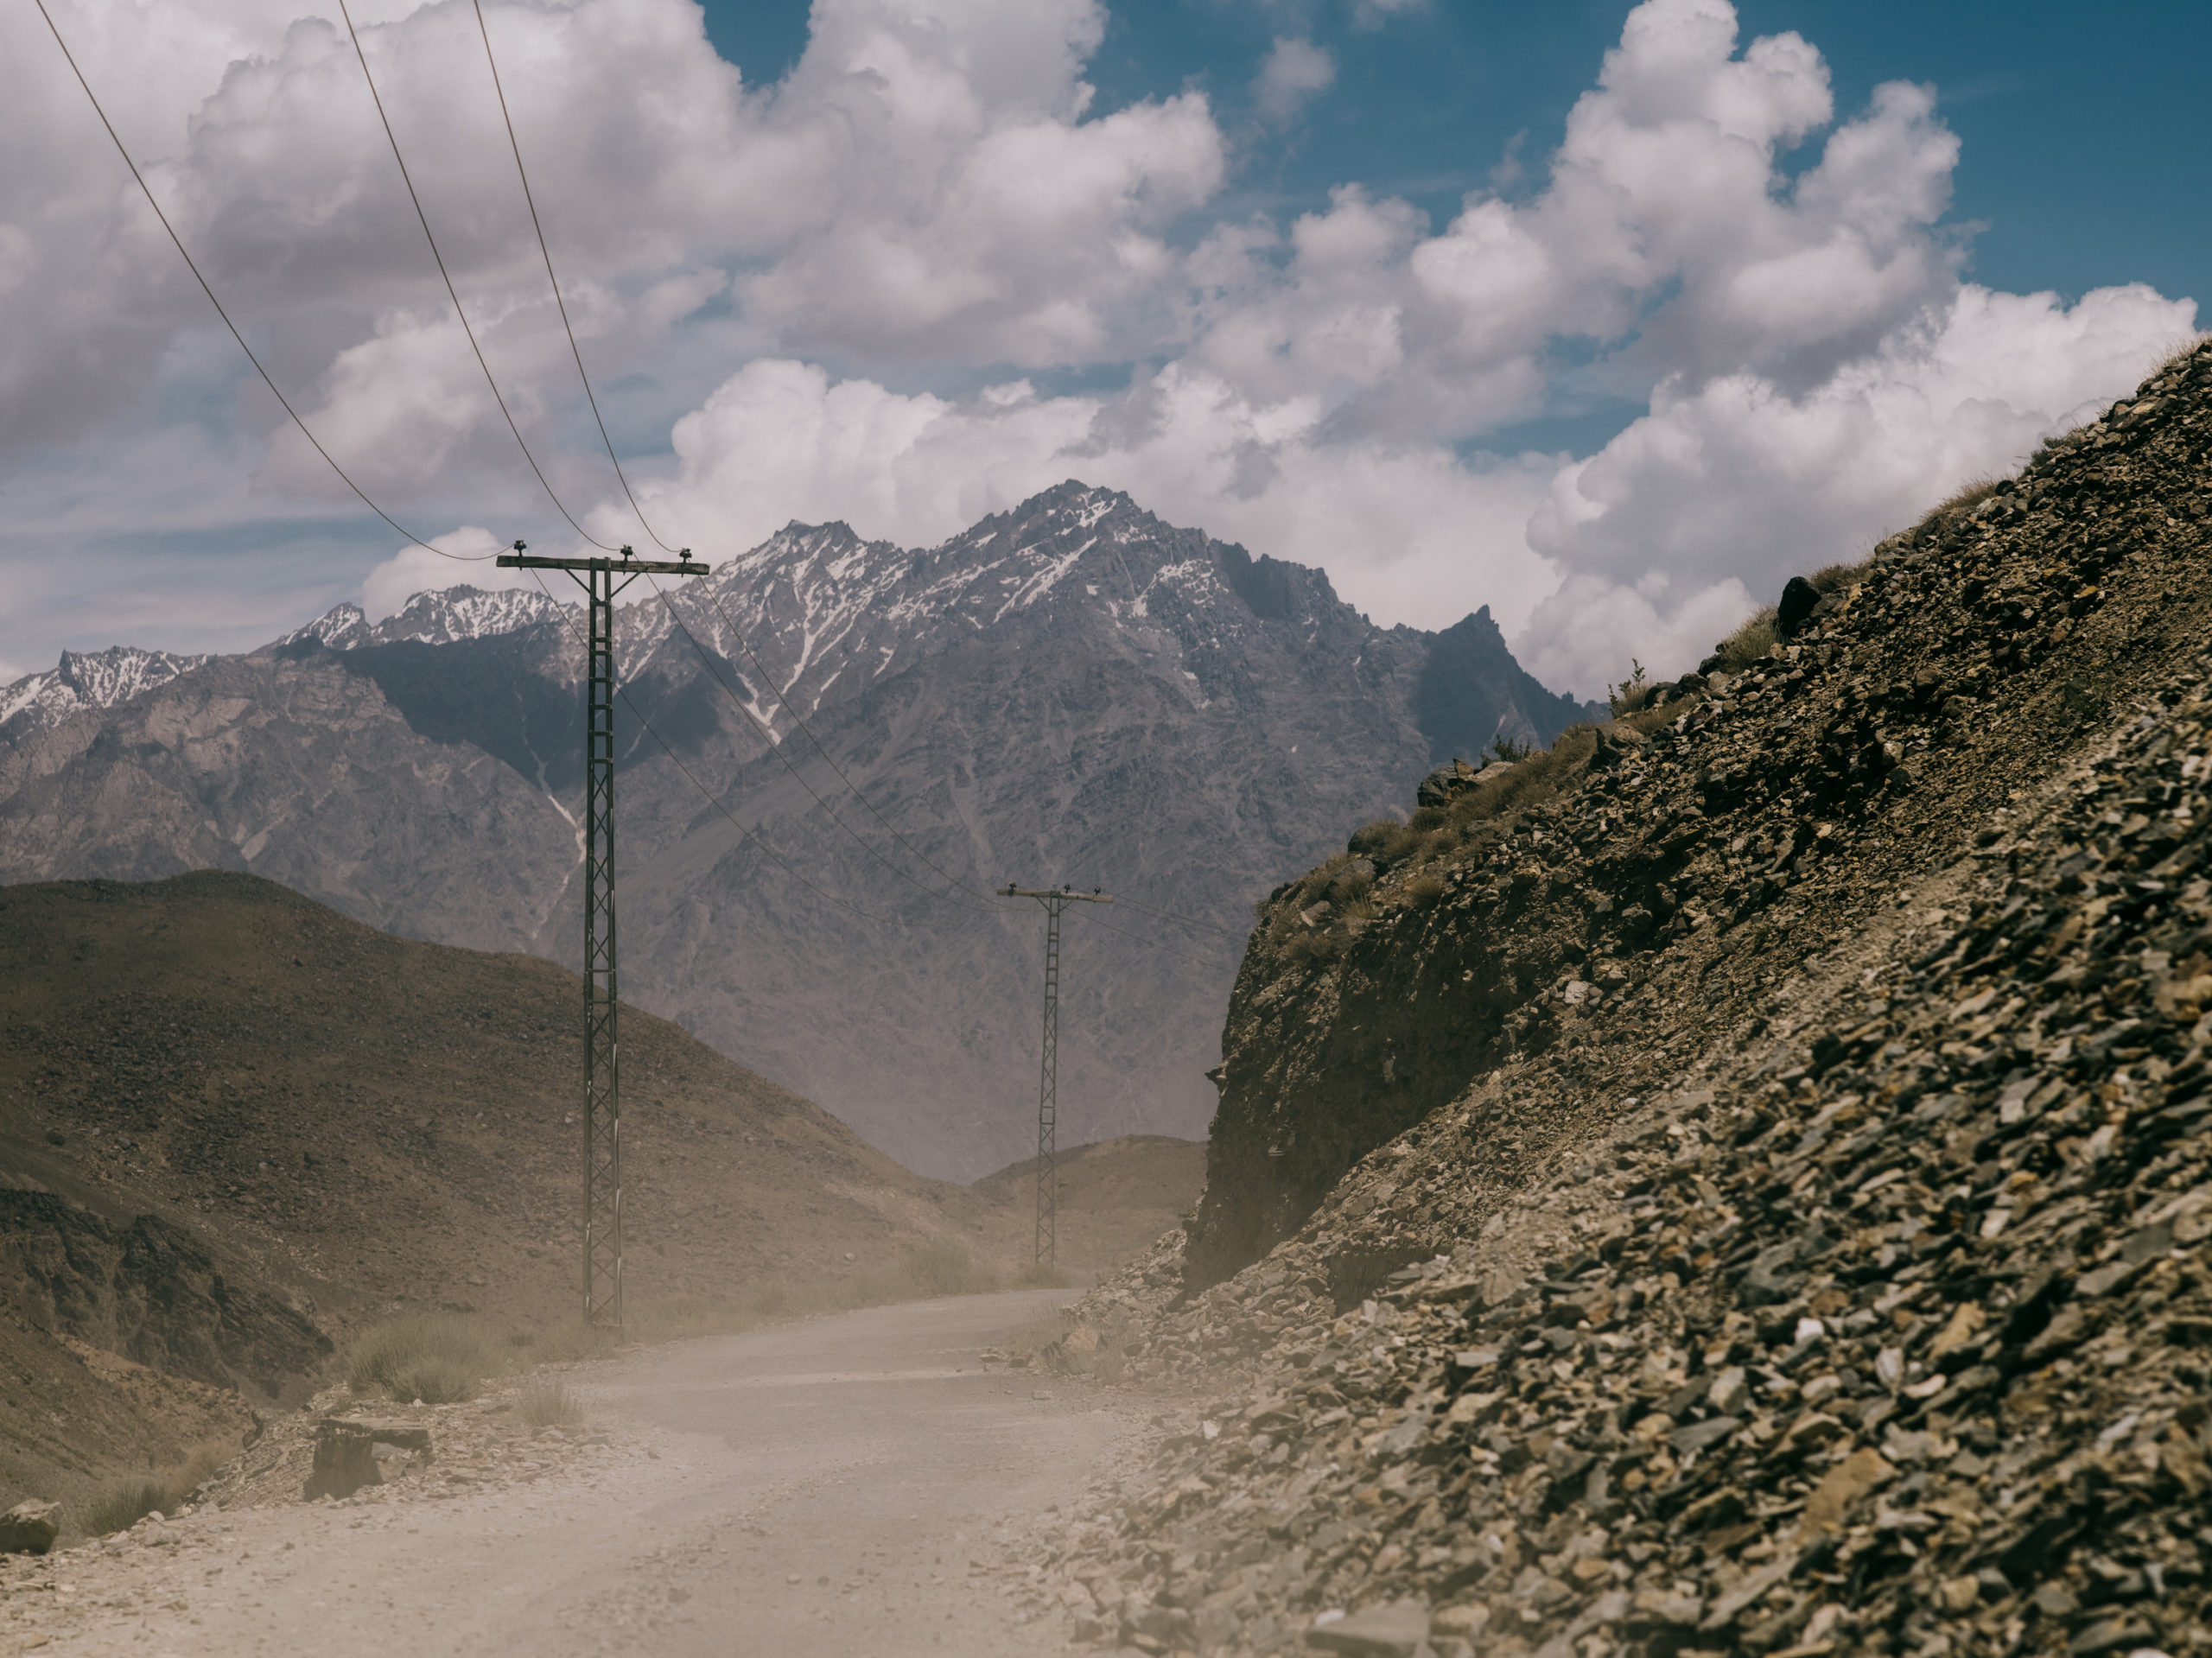 A dusty road with the mountains in the background